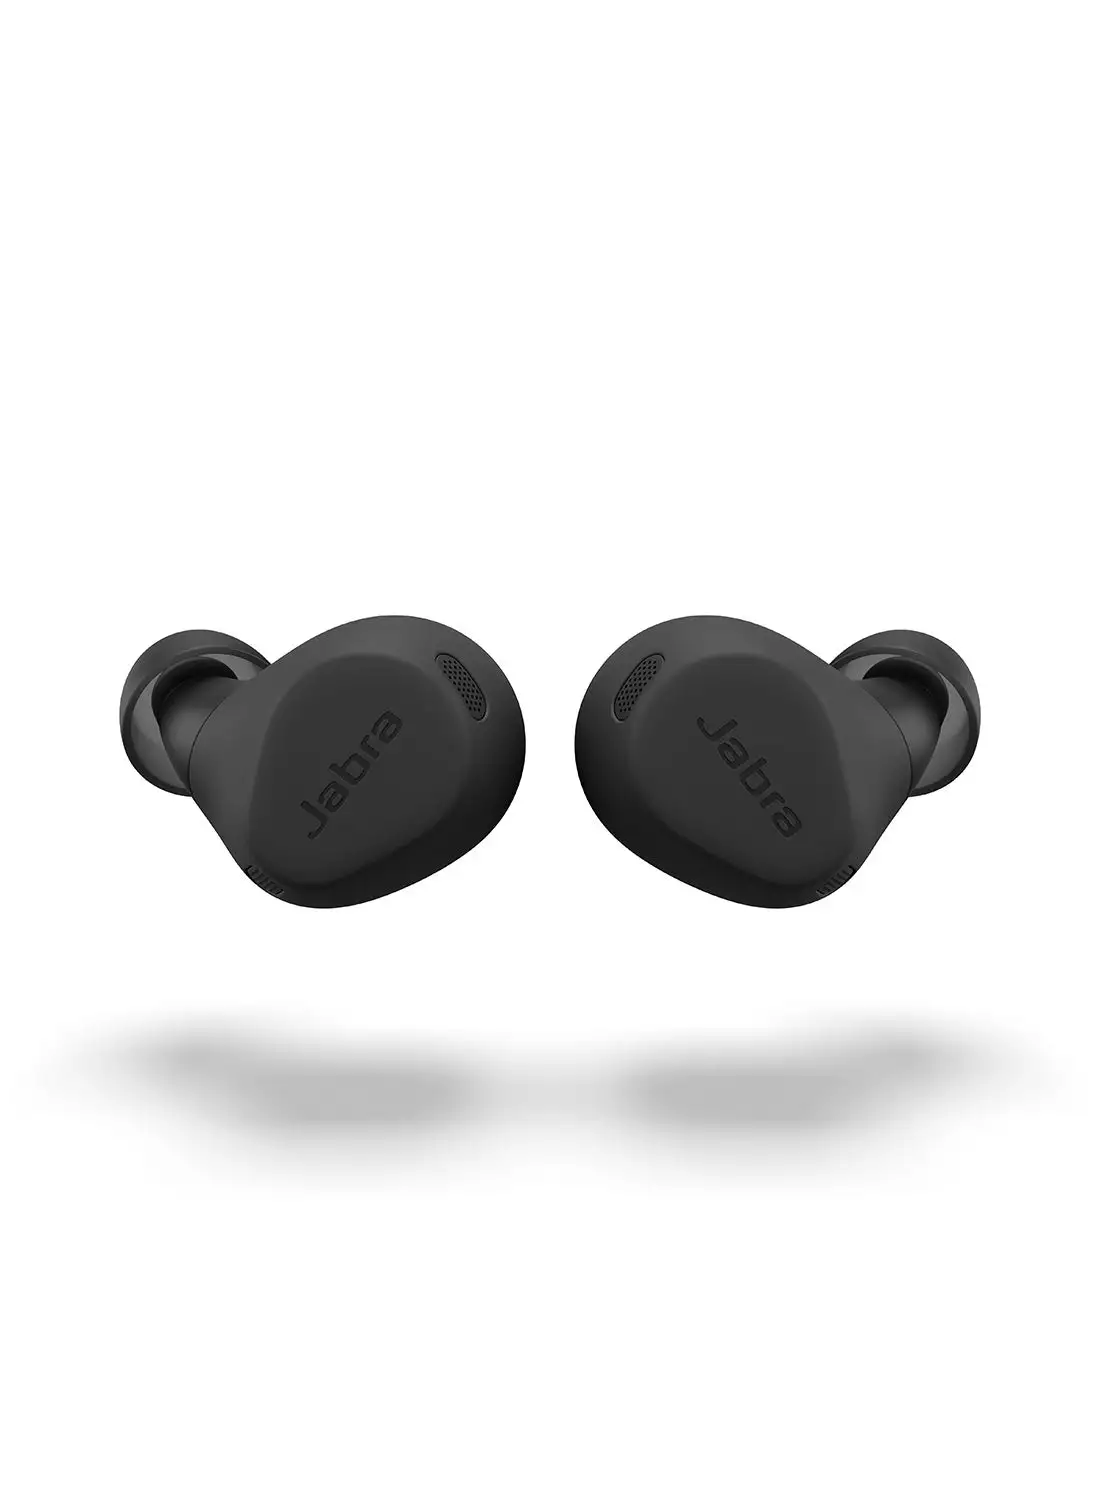 Jabra Elite 8 Active True – Bluetooth Sports Earbuds With Secure In-Ear Fit For All-Day Comfort - Military Grade Durability, Noise Cancellation, Dolby Surround Sound Black